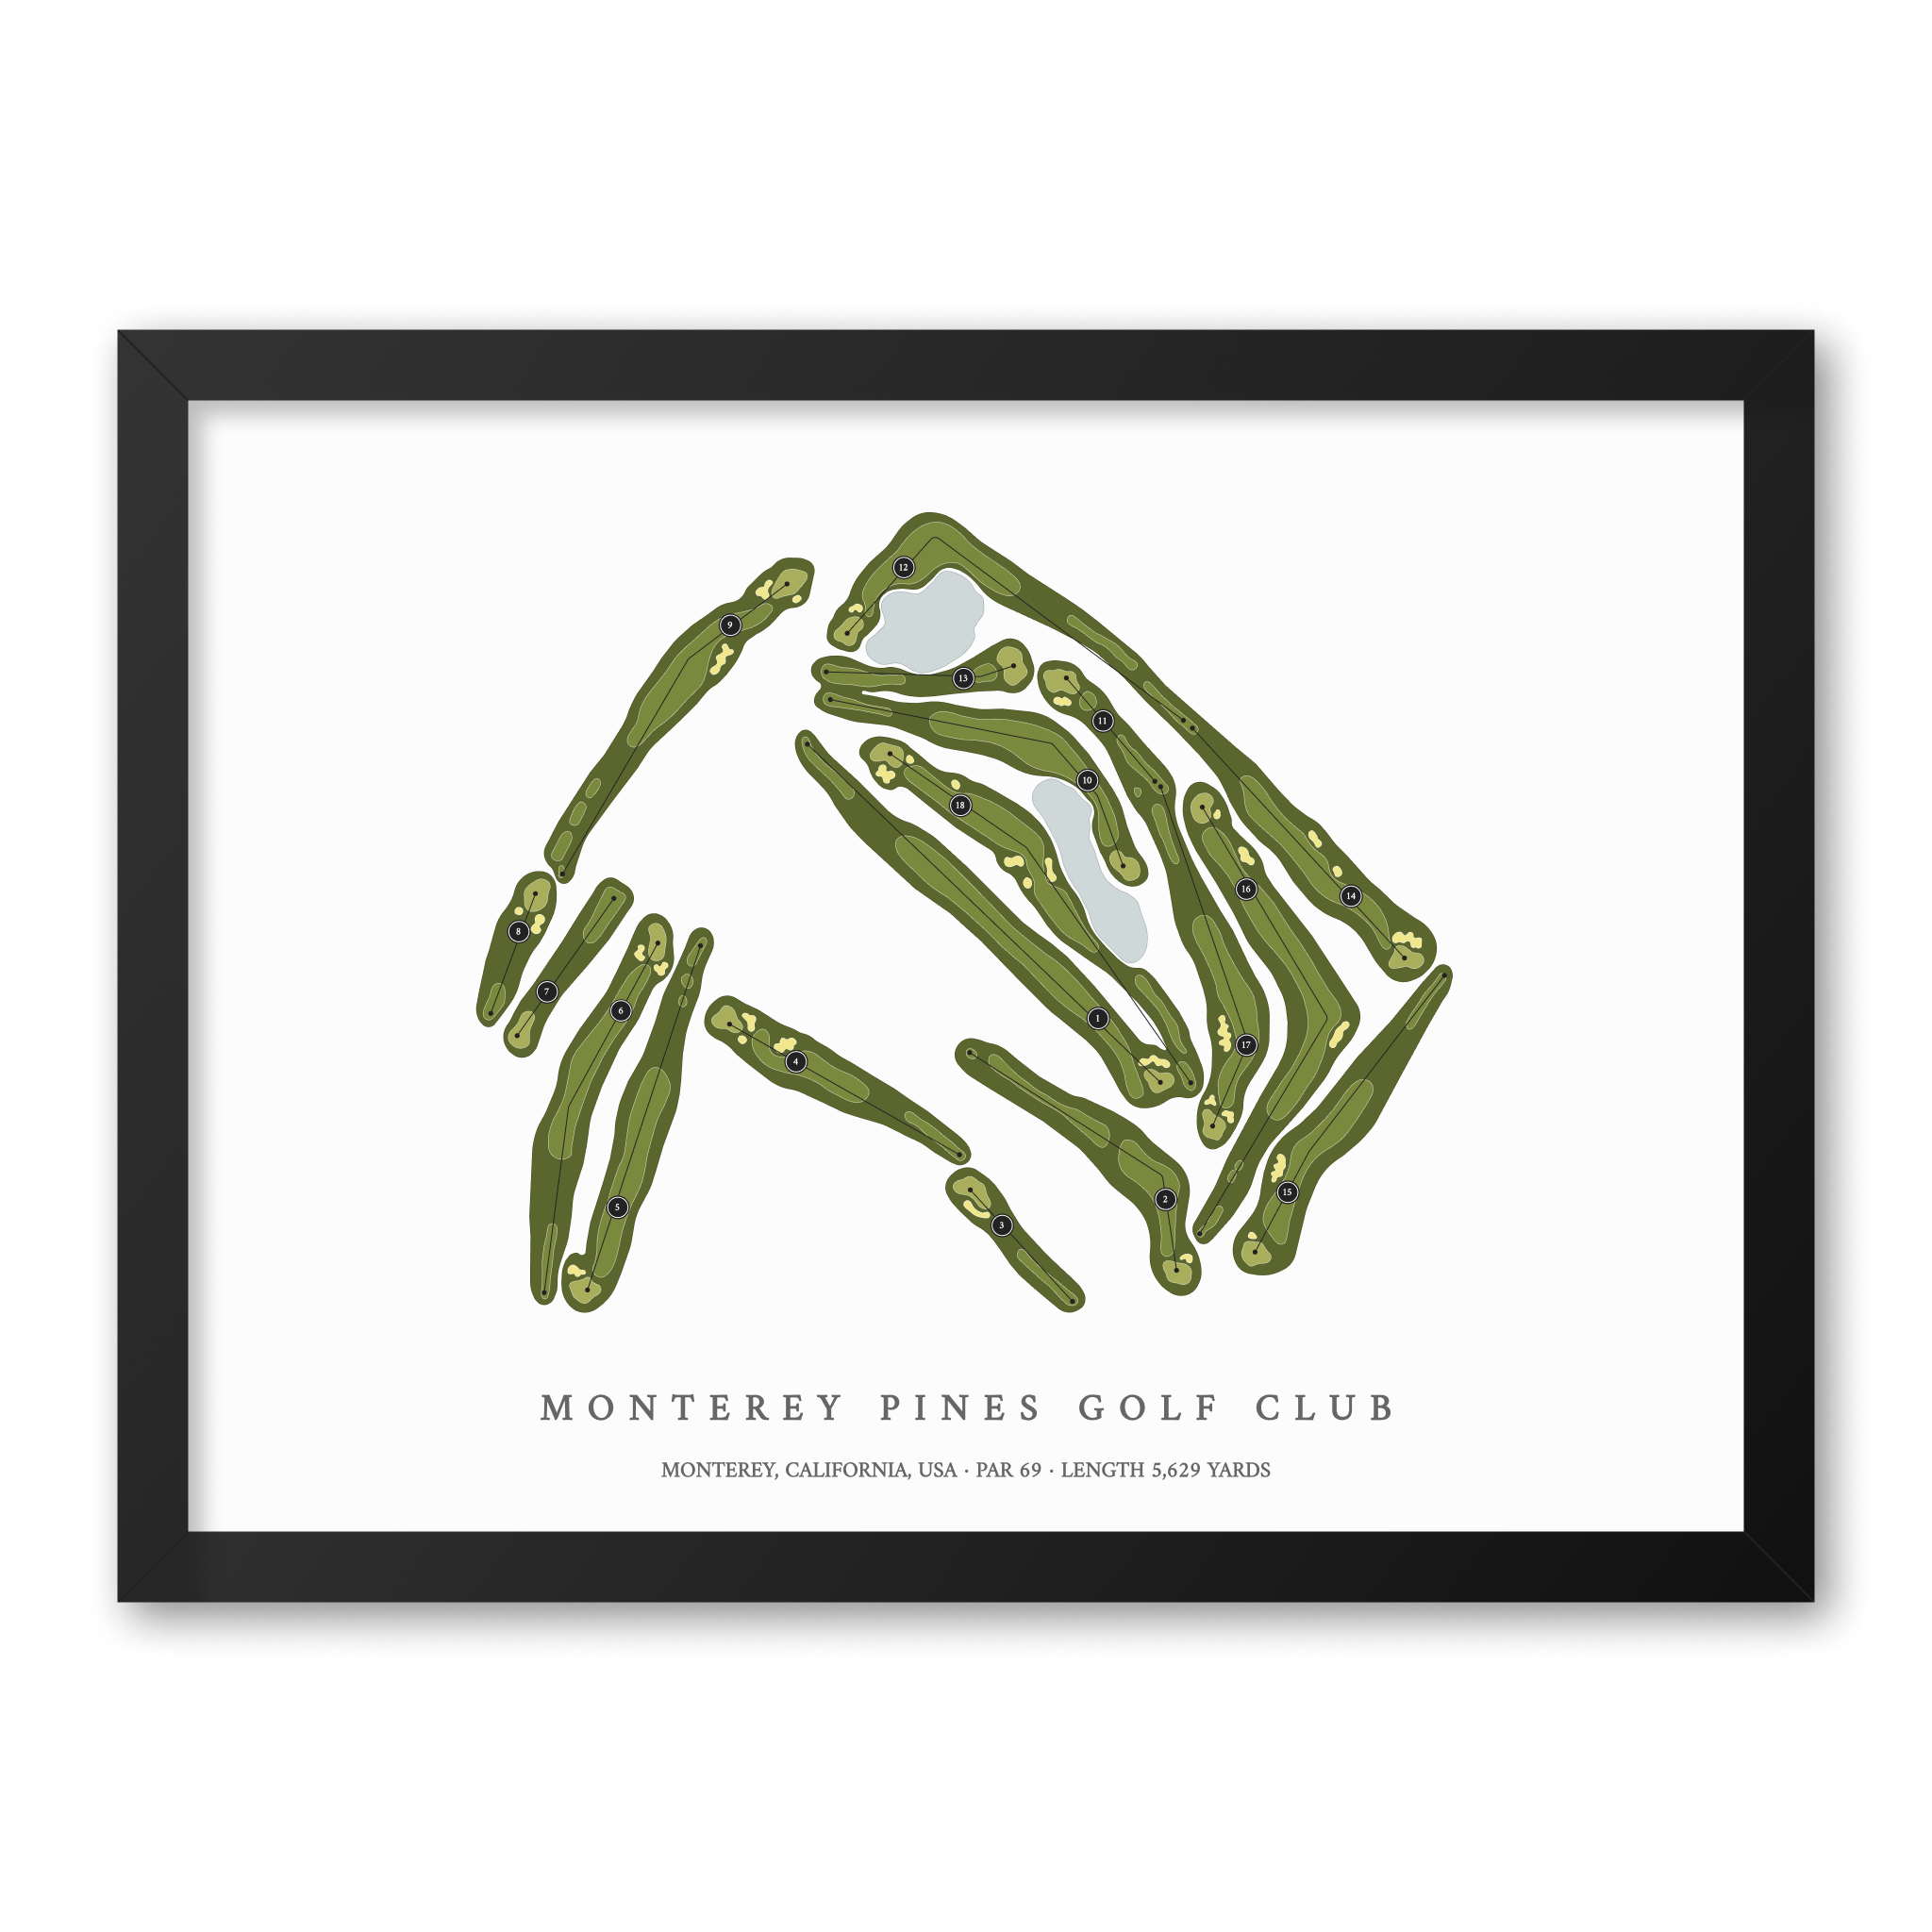 Monterey Pines Golf Club | Heritage Style Golf Course Print | Black Frame With Hole Numbers #hole numbers_yes